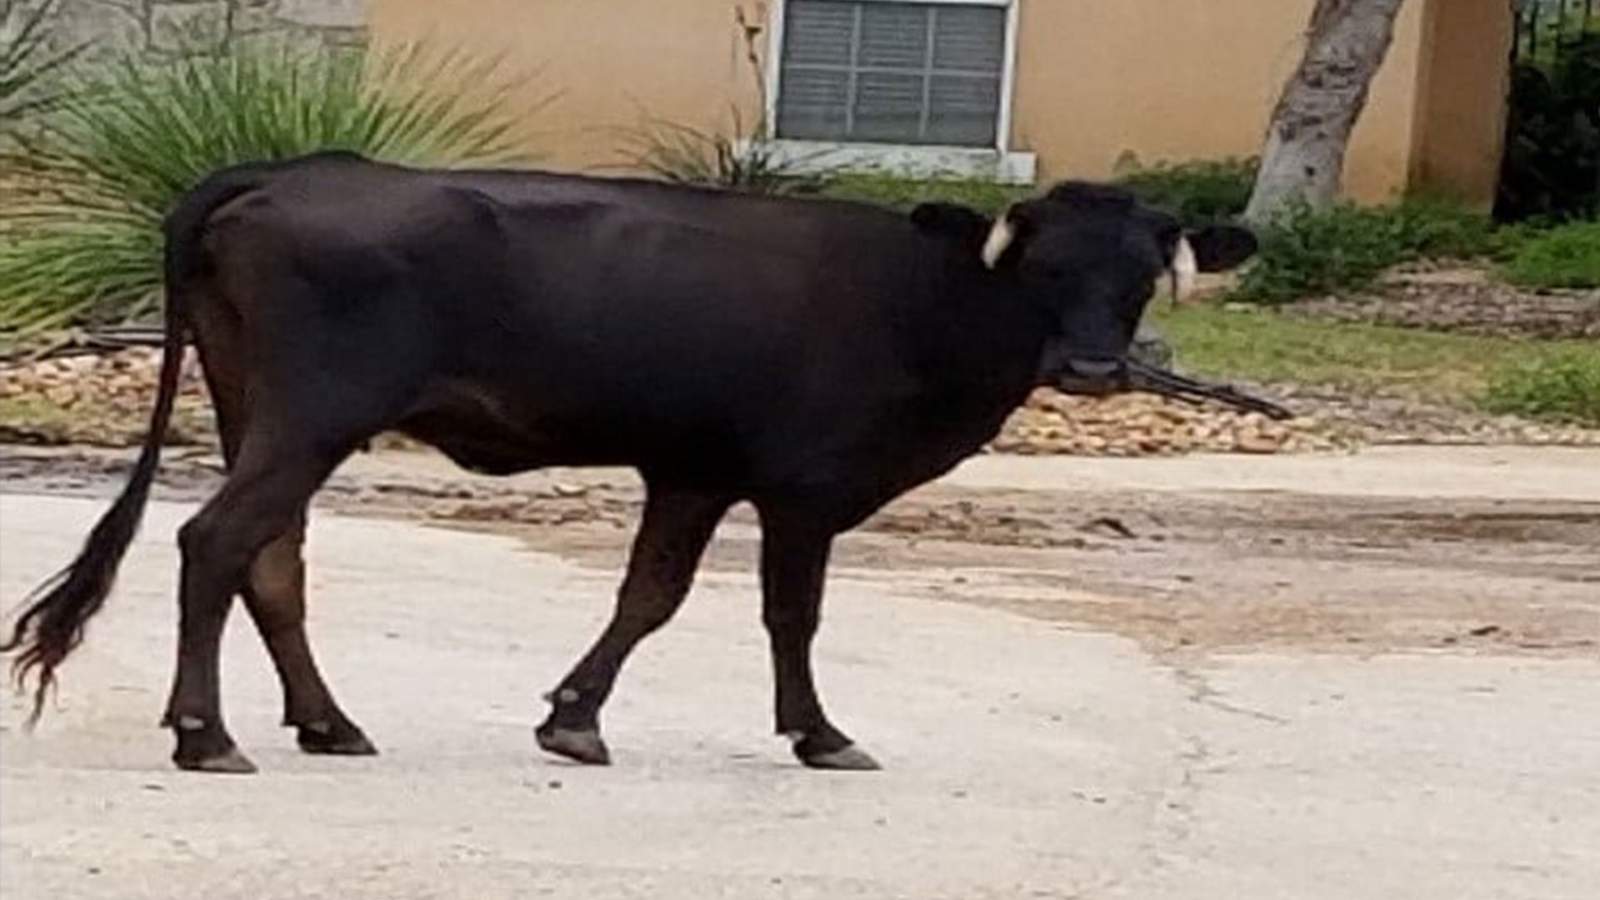 Is this your cow? Bovine found roaming FM 3009, Comal County Sheriff’s Office says